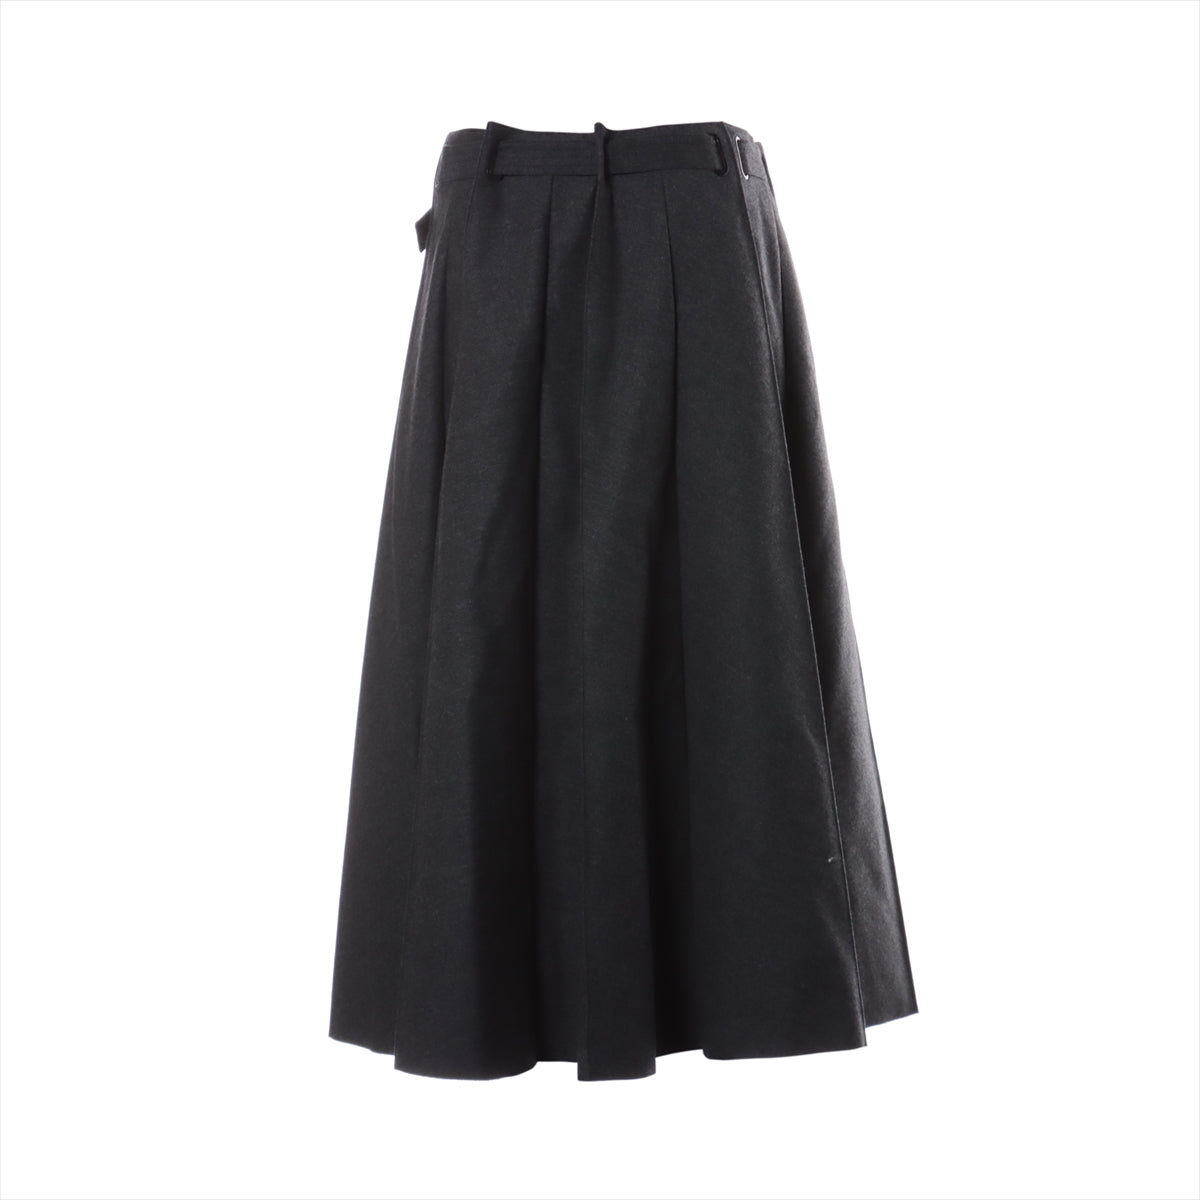 Fendi 20 years Wool & cashmere Skirt 40 Ladies' Grey  FQ7168 Belted Pleats